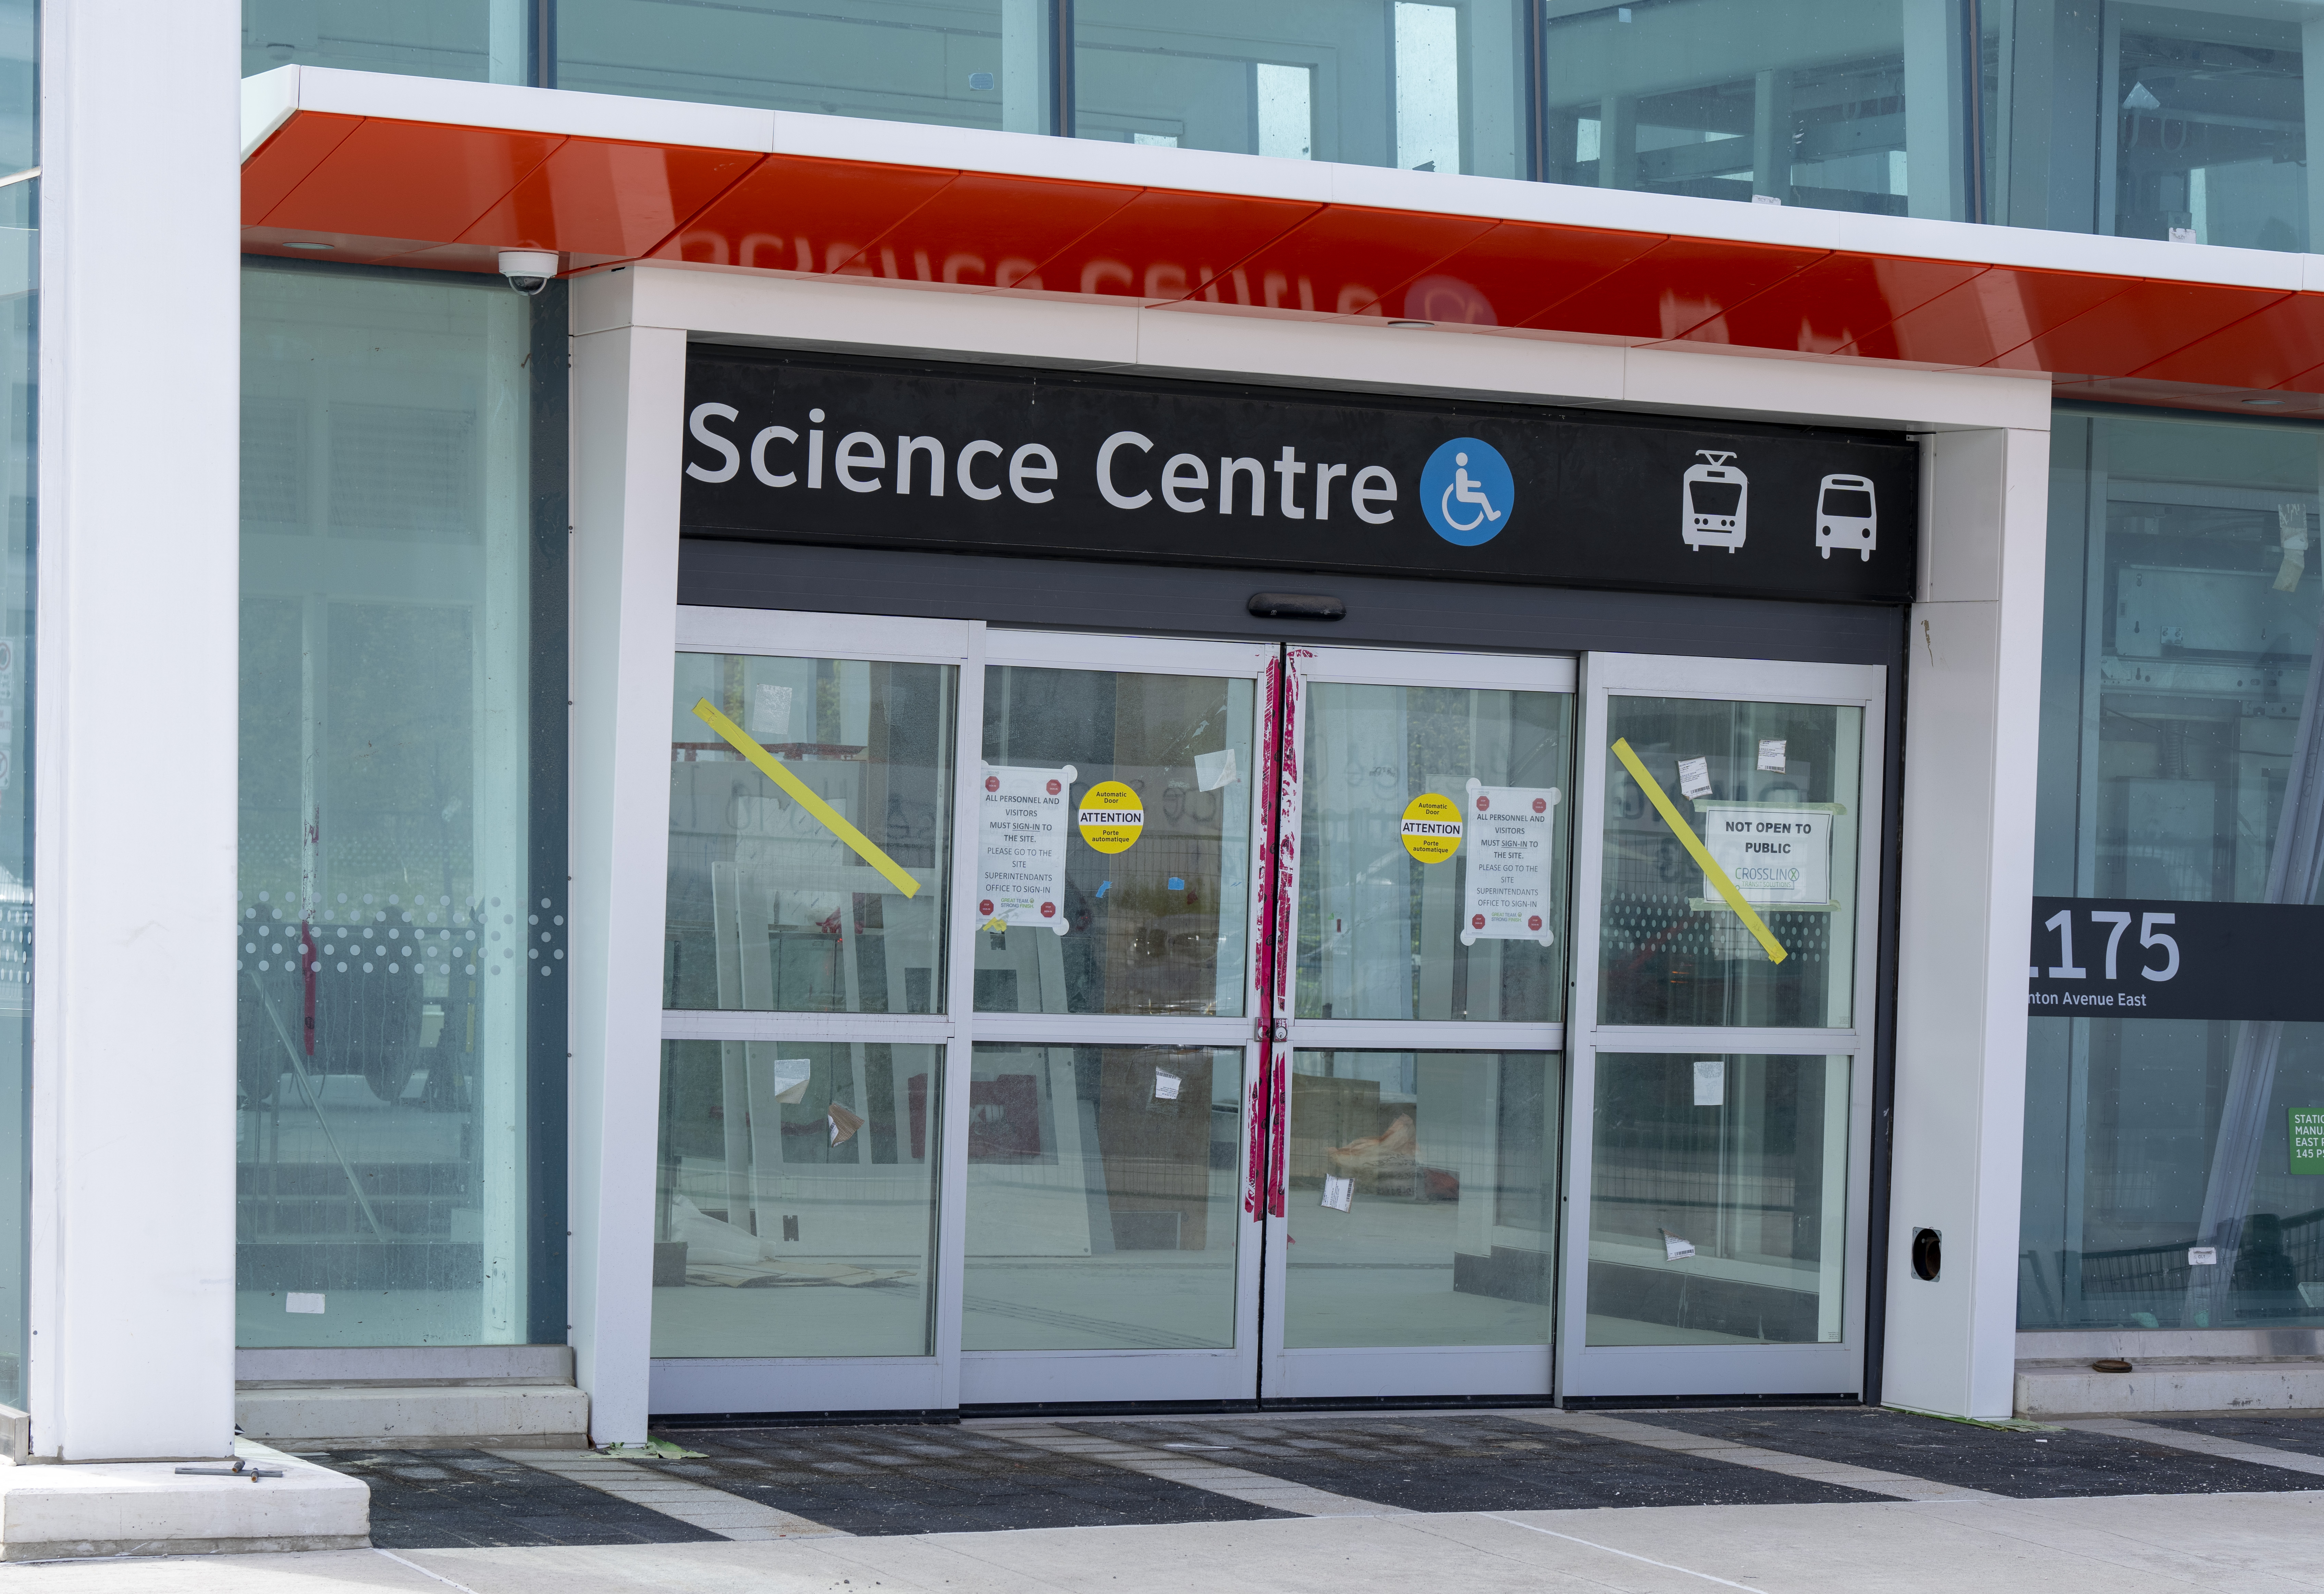 Metrolinx not renaming Eglinton LRT science centre stop ‘at this time’ despite recommendation 